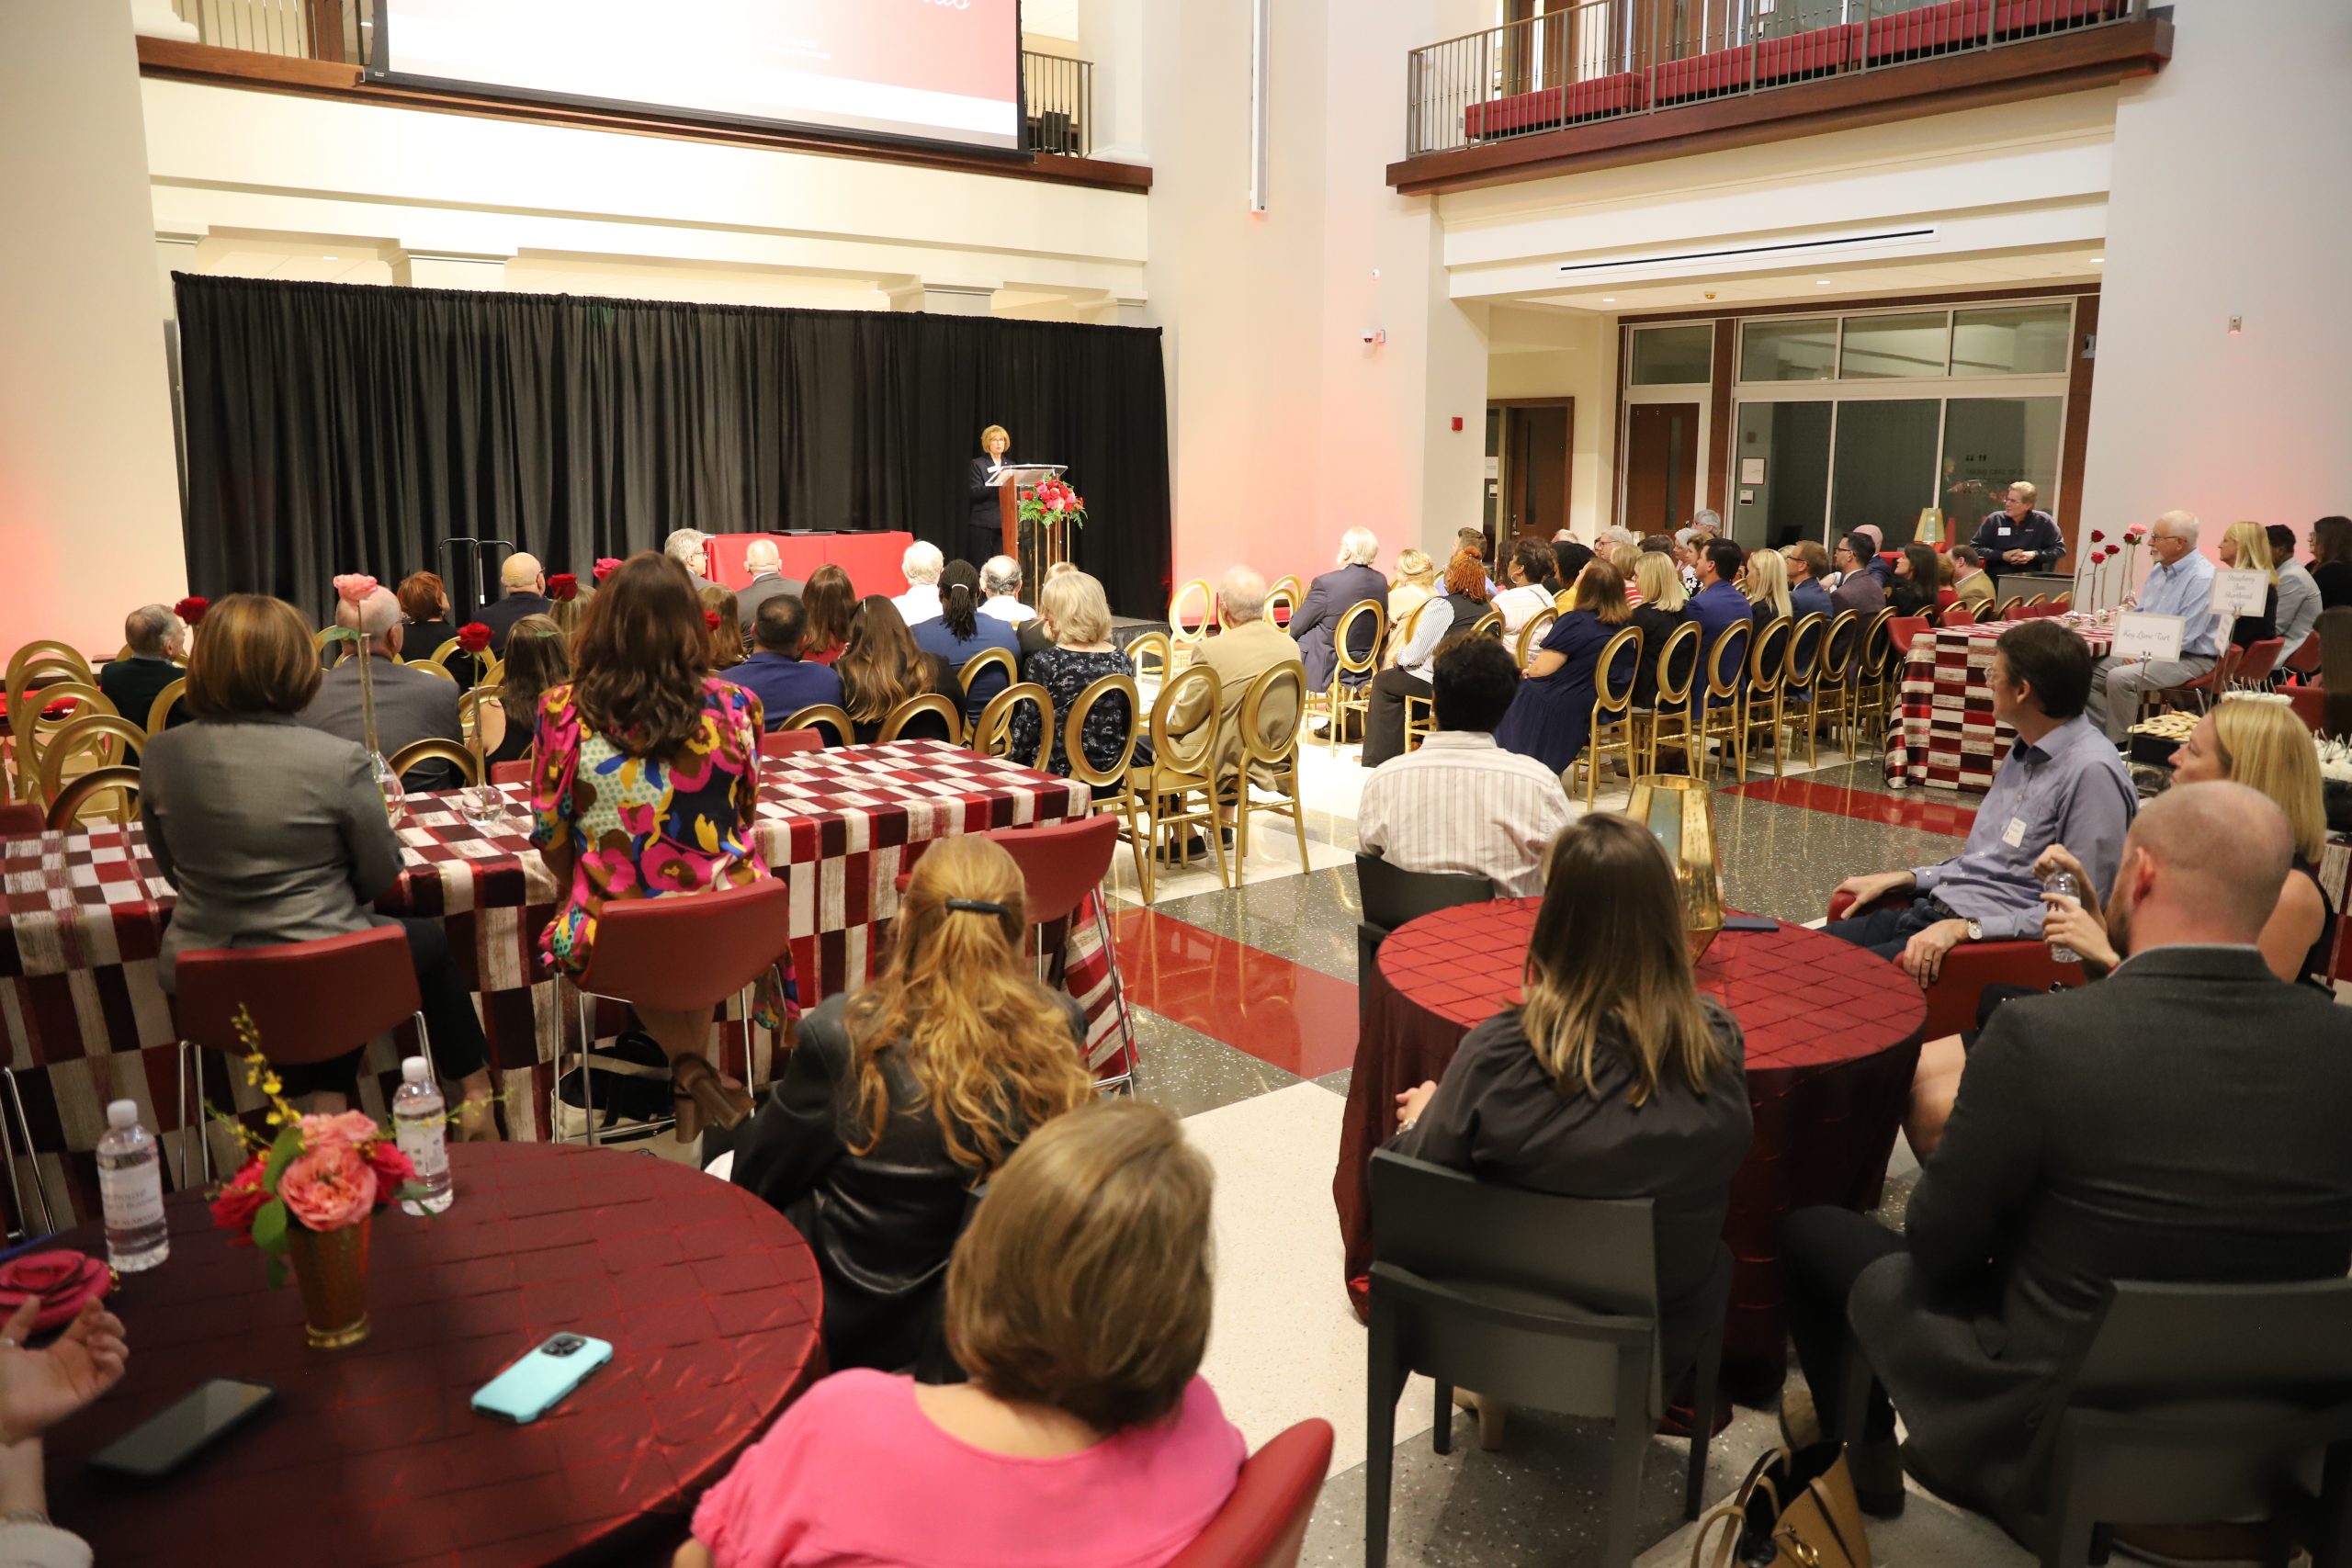 Faculty and staff awards celebration